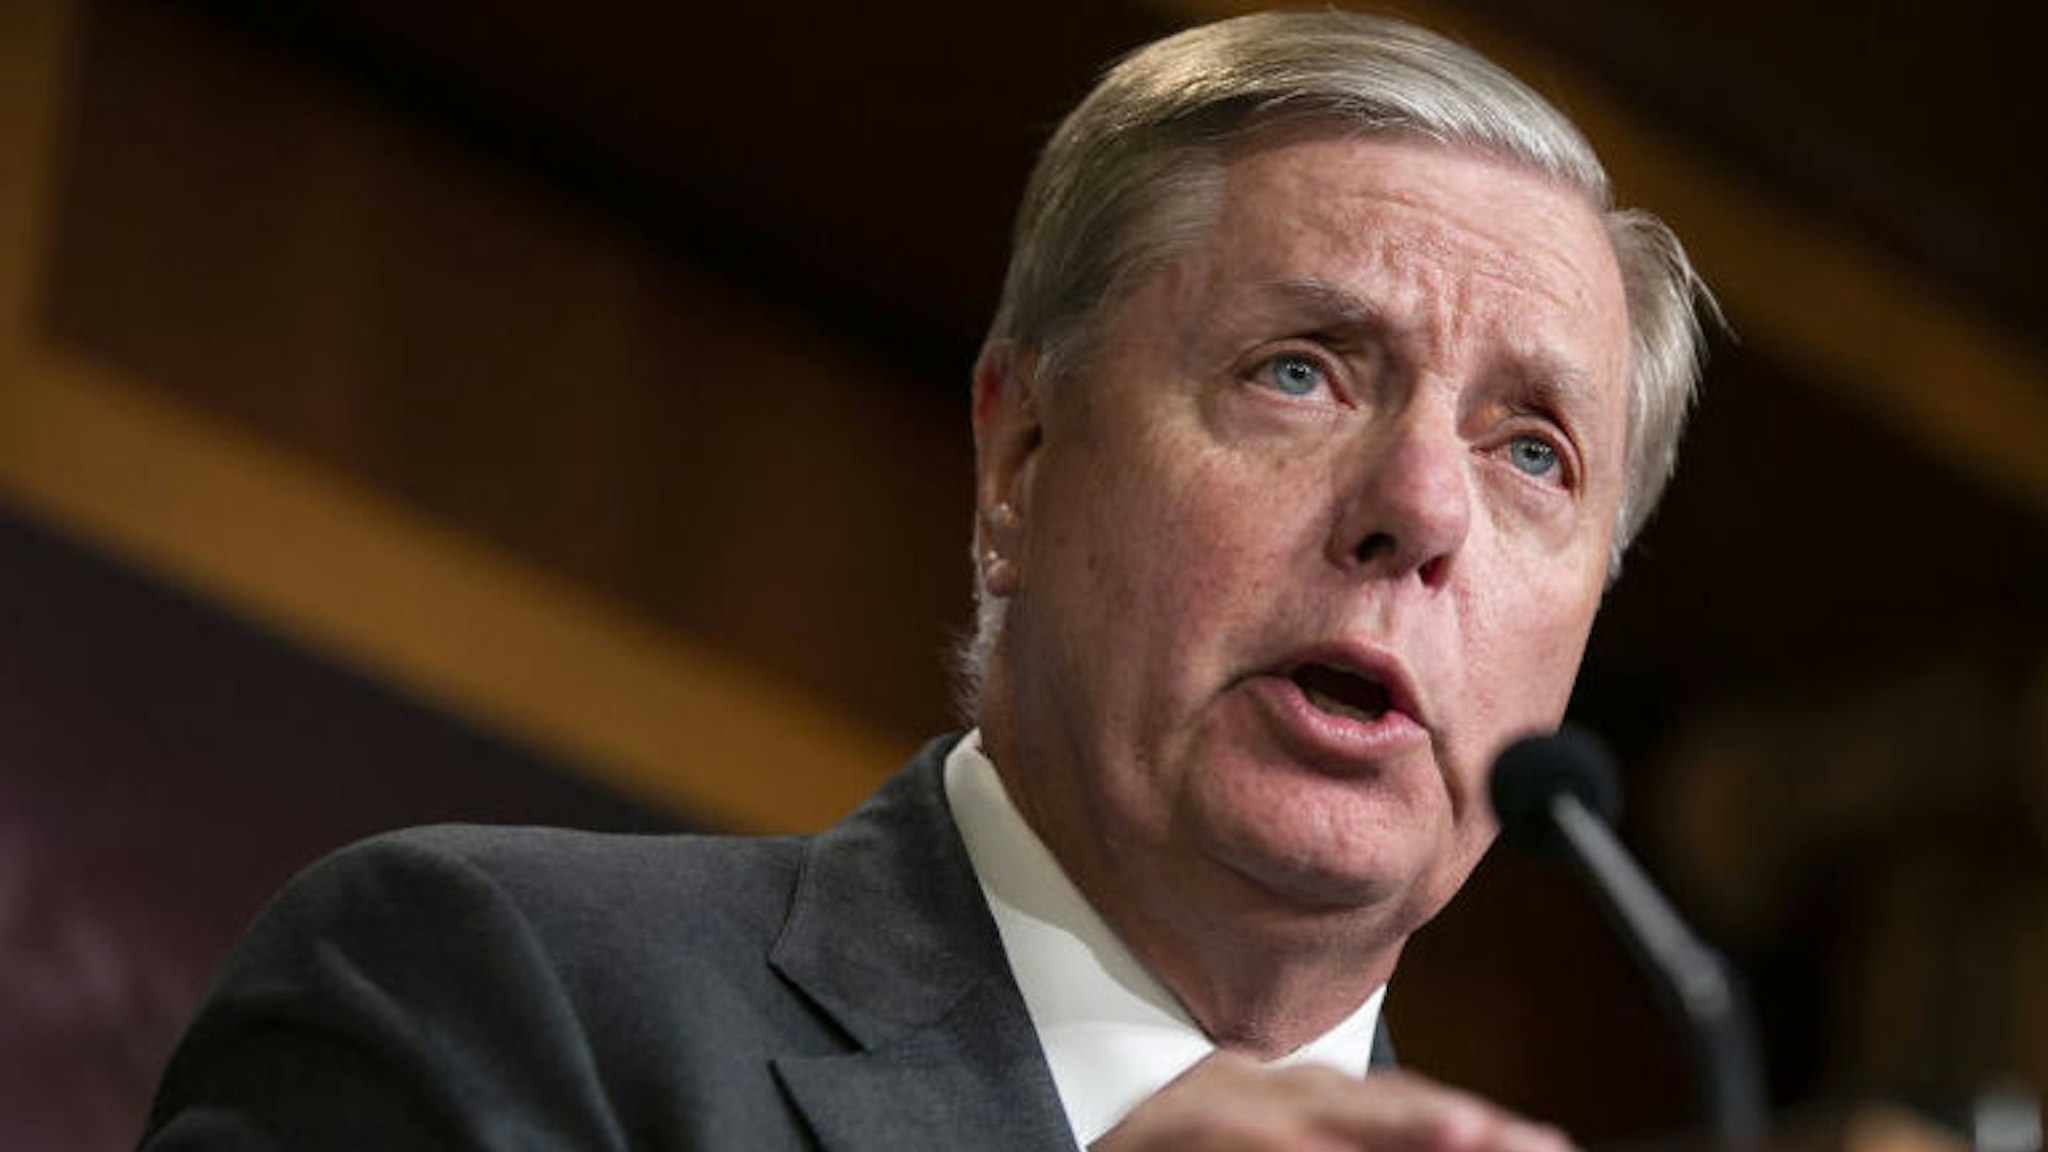 Senator Lindsey Graham, a Republican from South Carolina, speaks during a news conference on Capitol Hill in Washington, D.C., U.S., on Thursday, Oct. 24, 2019. Graham introduced a resolution with Senate Majority Leader Mitch McConnell that condemns the "closed door, illegitimate" impeachment inquiry led by House Democrats.